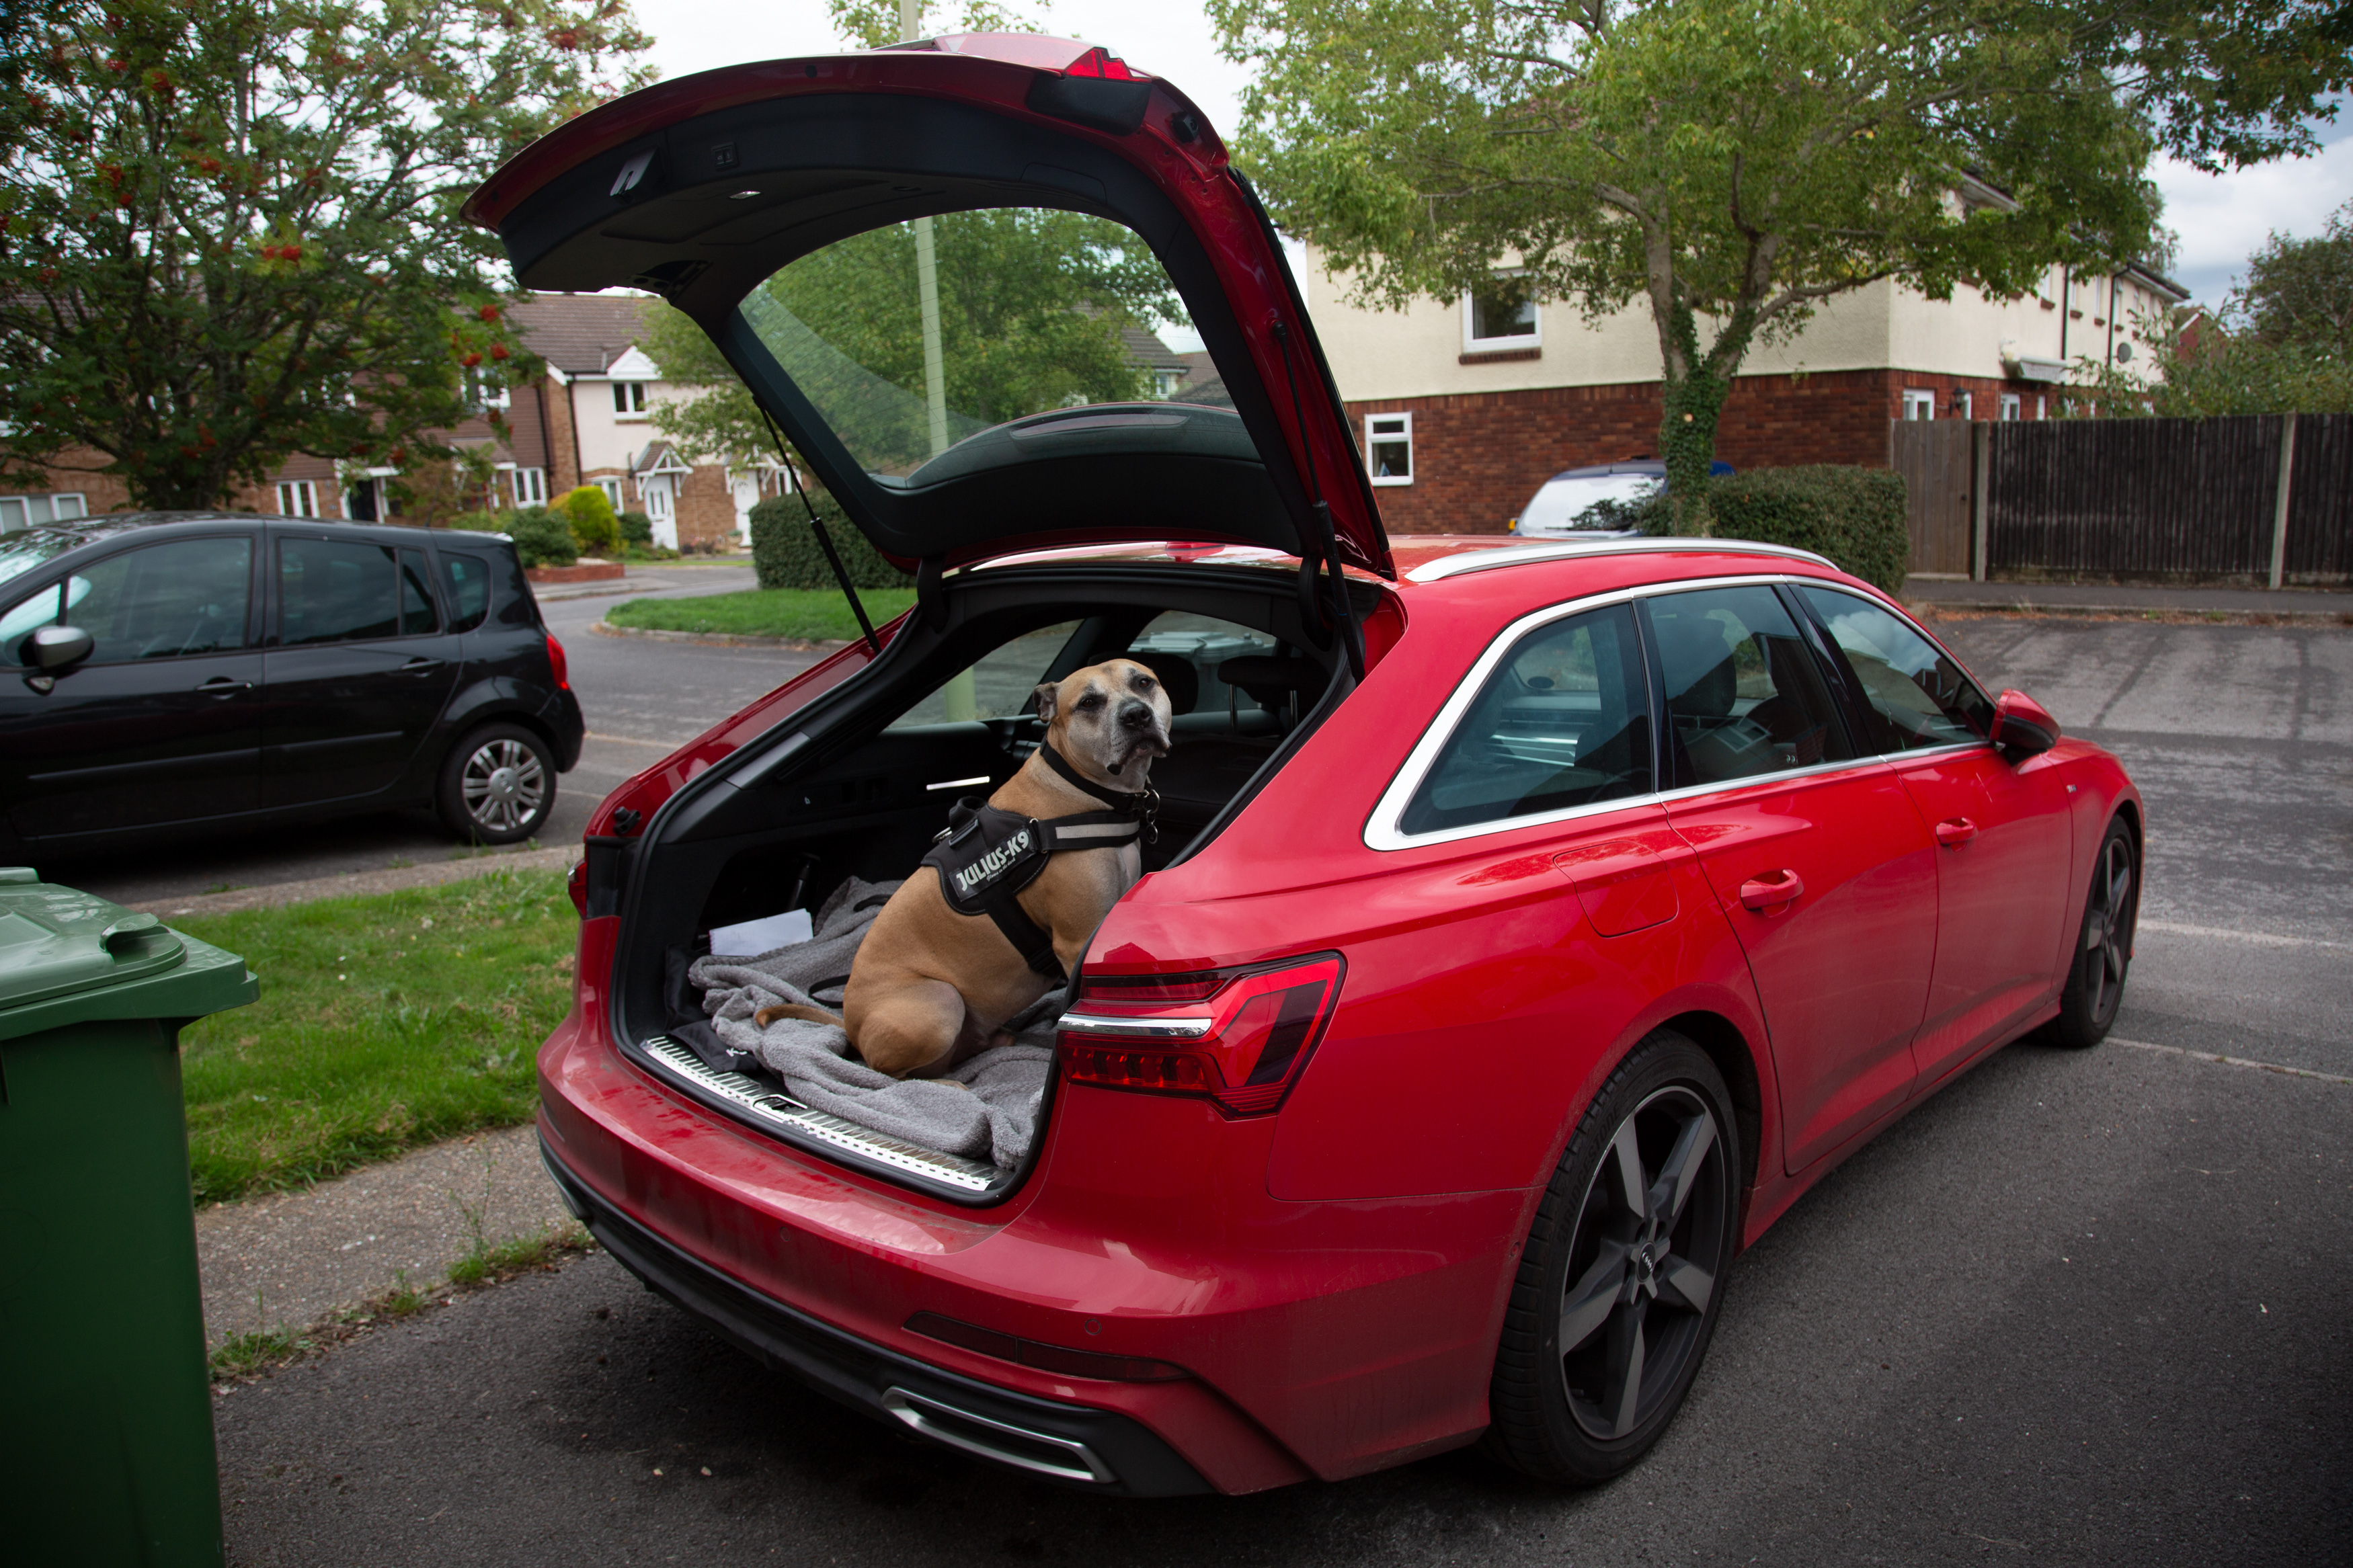 The A6 is a dog-friendly mode of transport